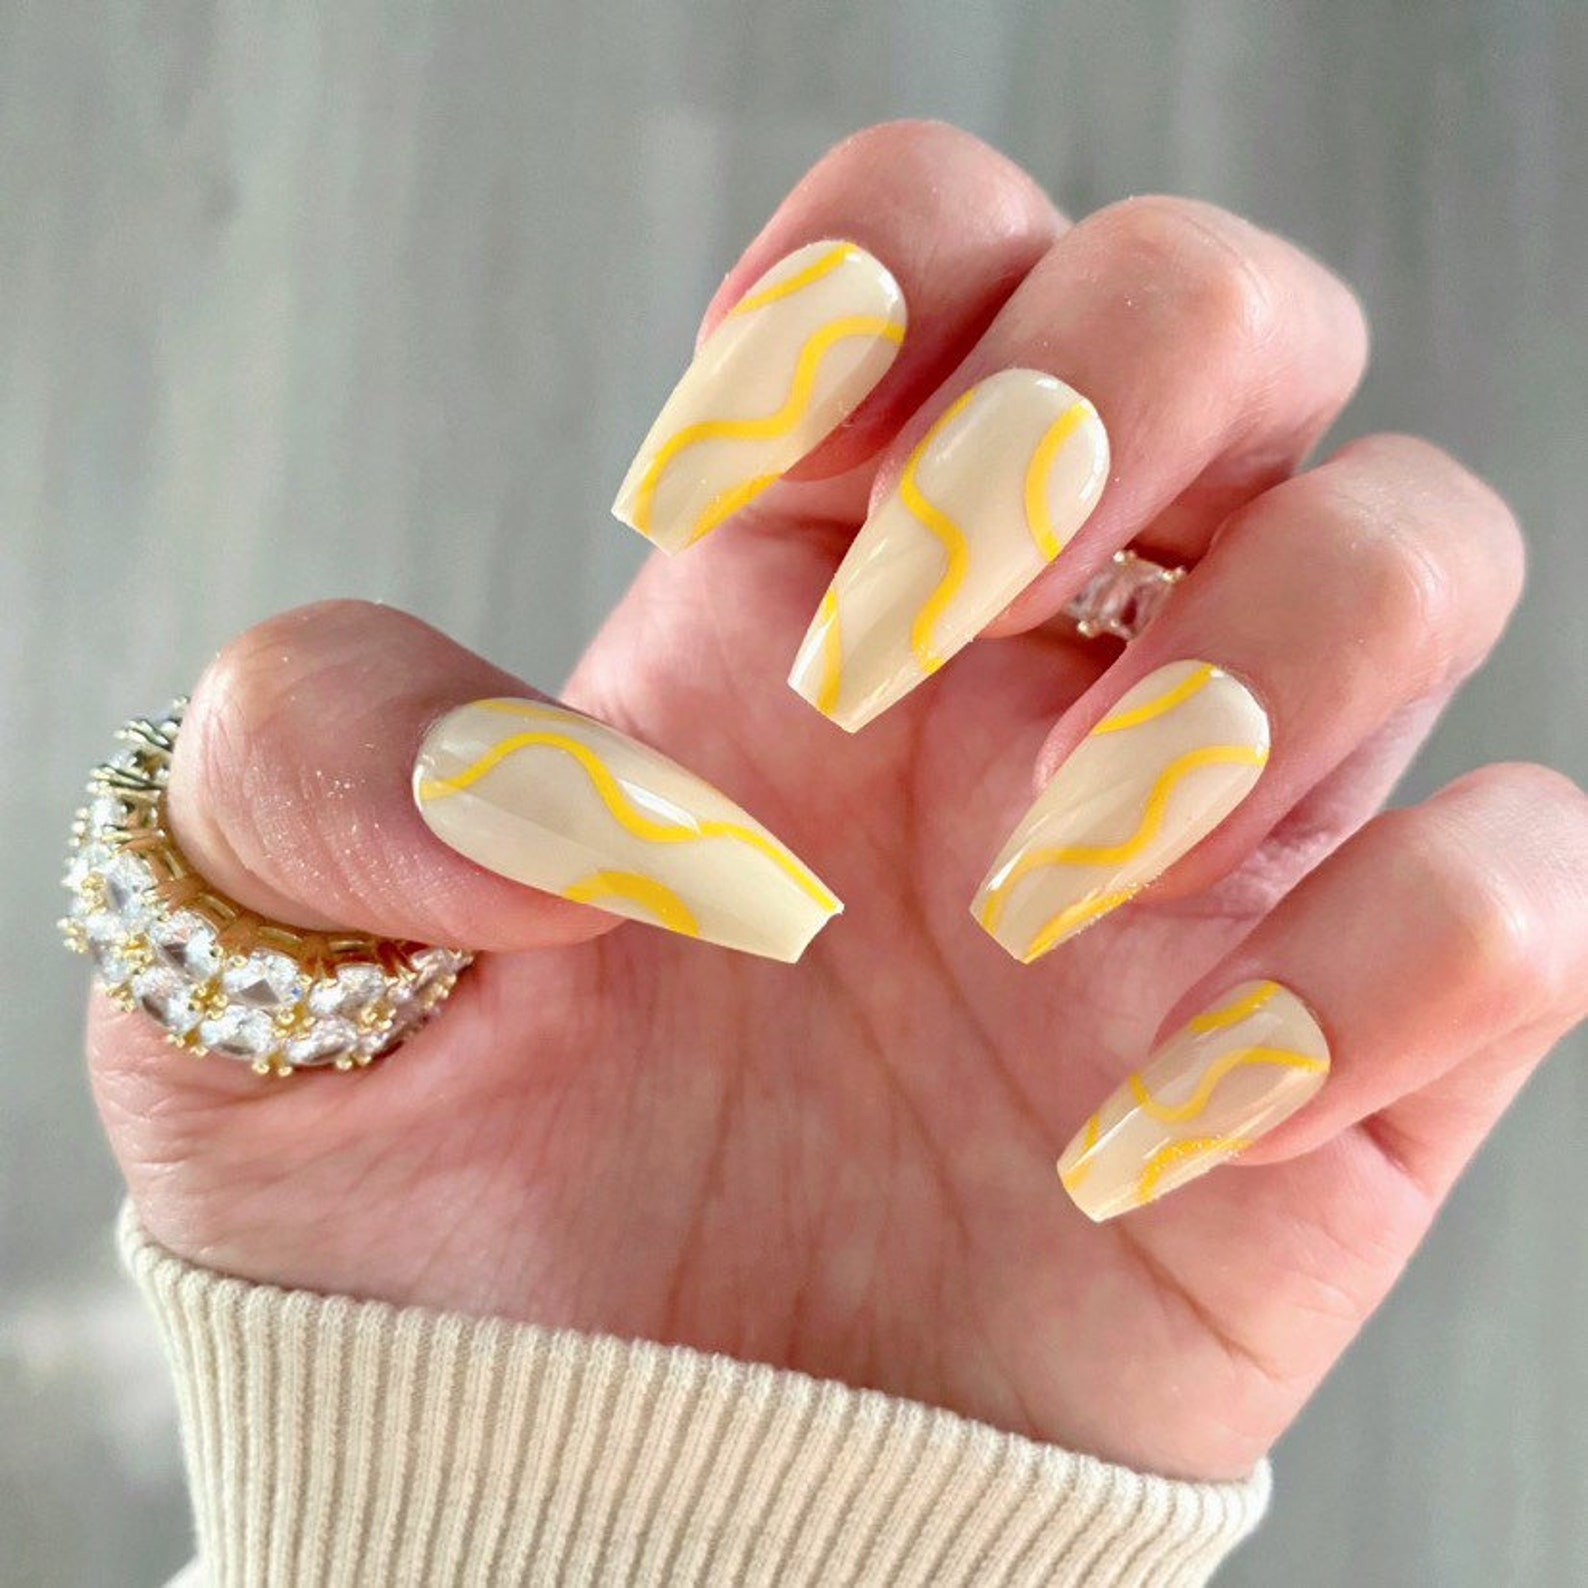 Nail and Manicure Quotes for Instagram Captions